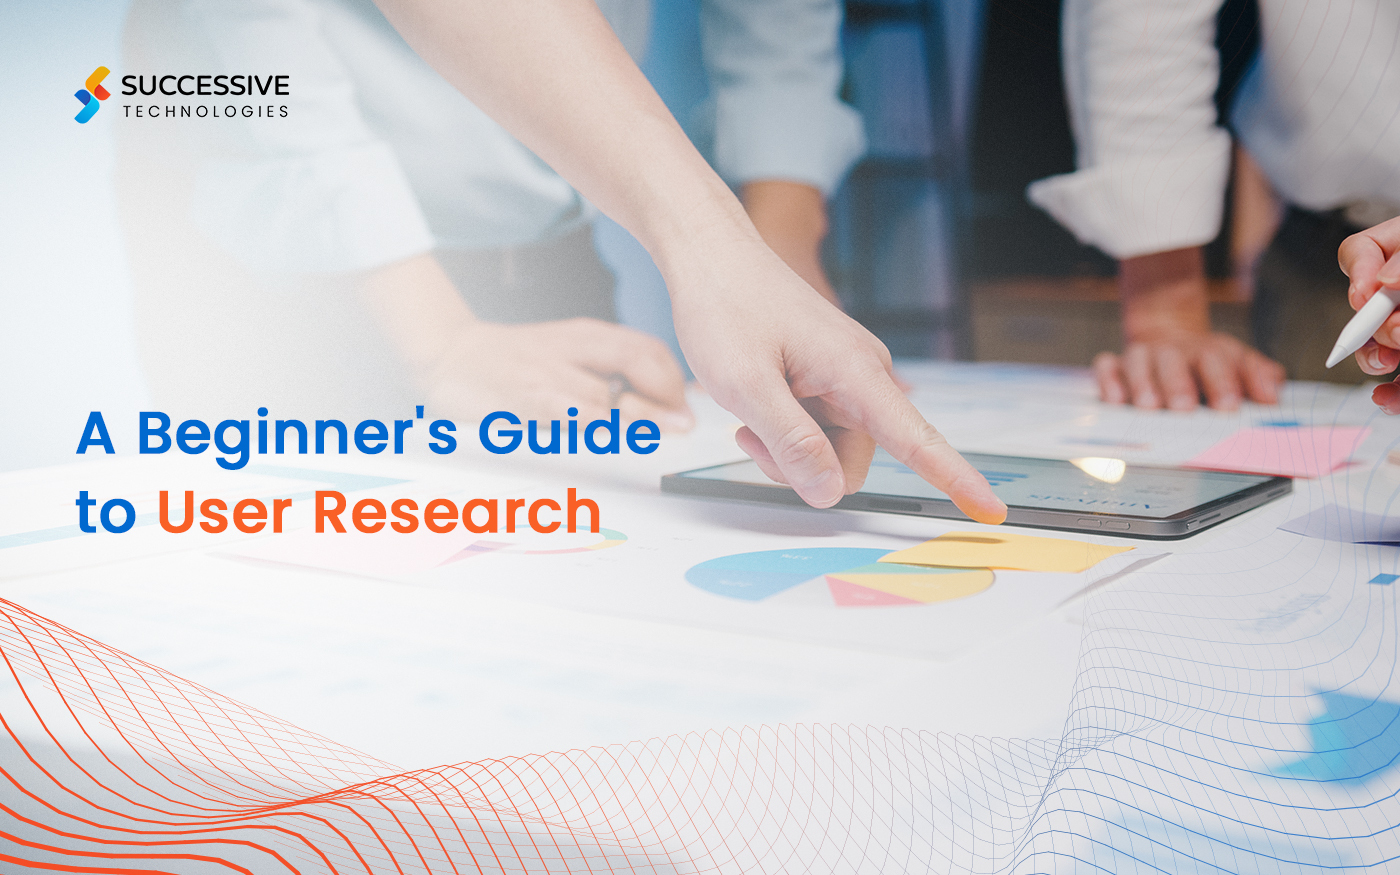 A Beginner’s Guide to User Research